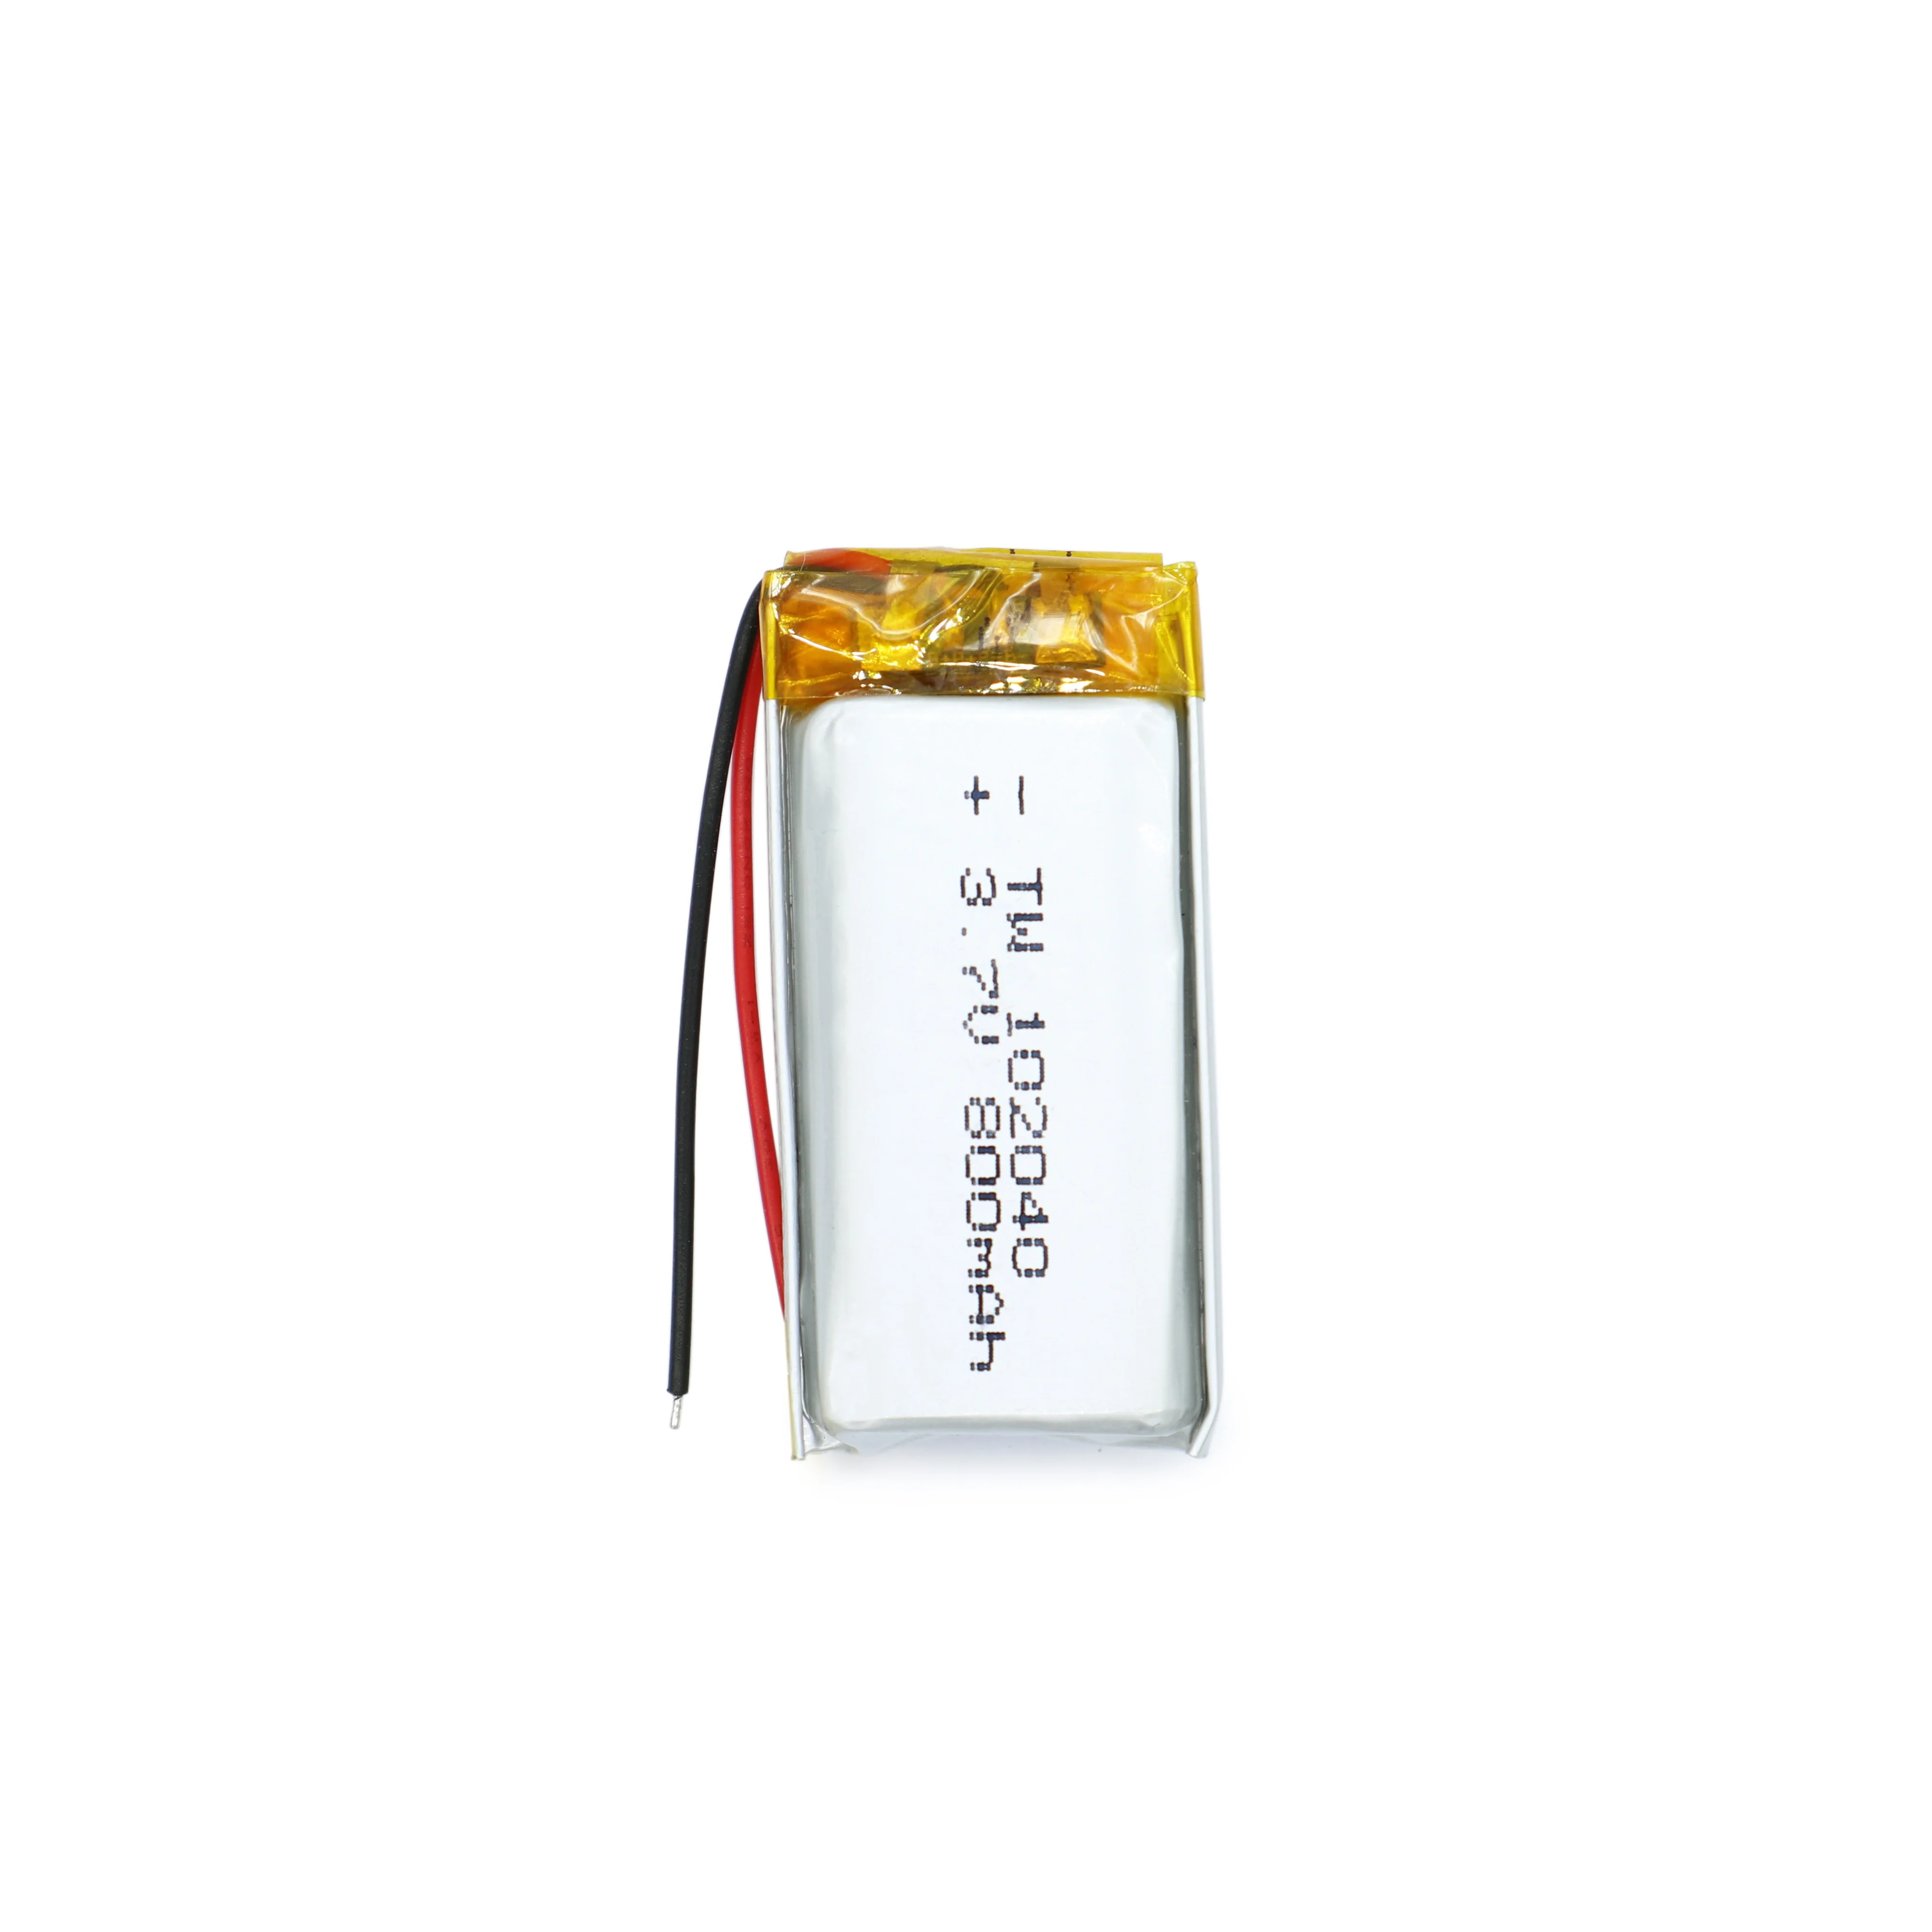 3.7v 102040 lithium polymer battery  800mAh rechargeable battery for Digital Products